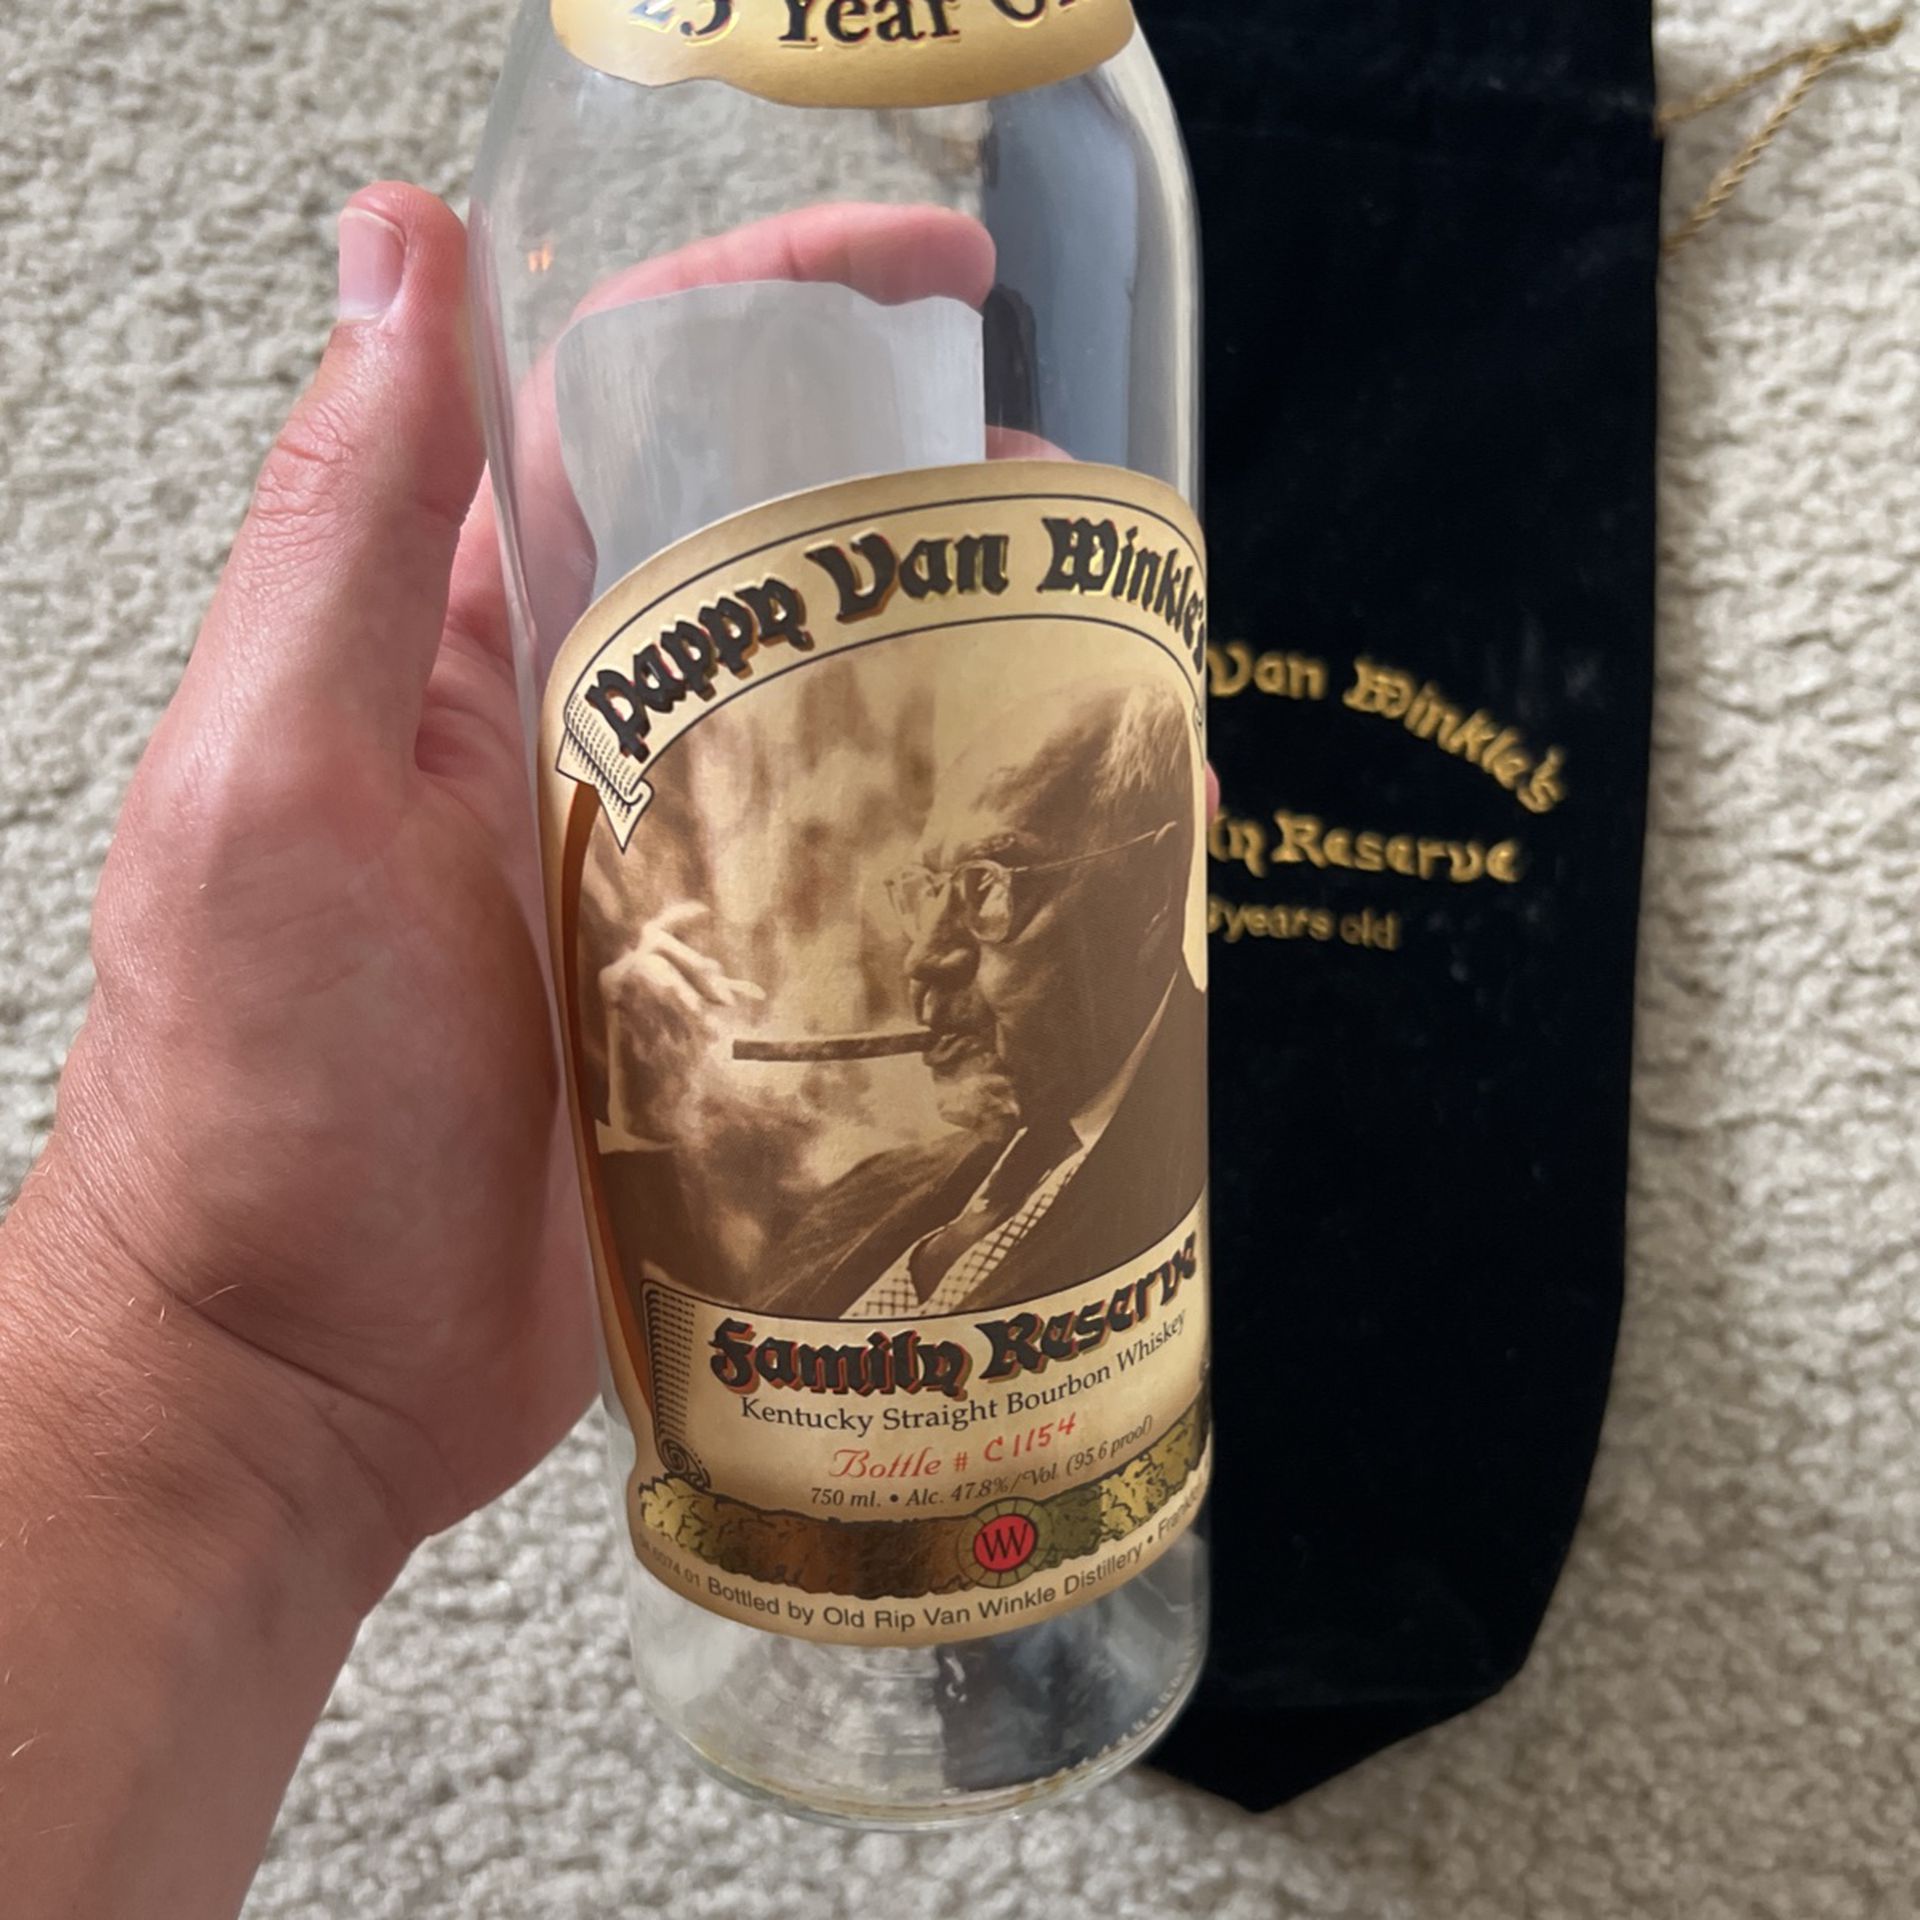 Numbered Pappy Van Winkle Family Reserve 23 Year old w/ Bag (empty Bottle)